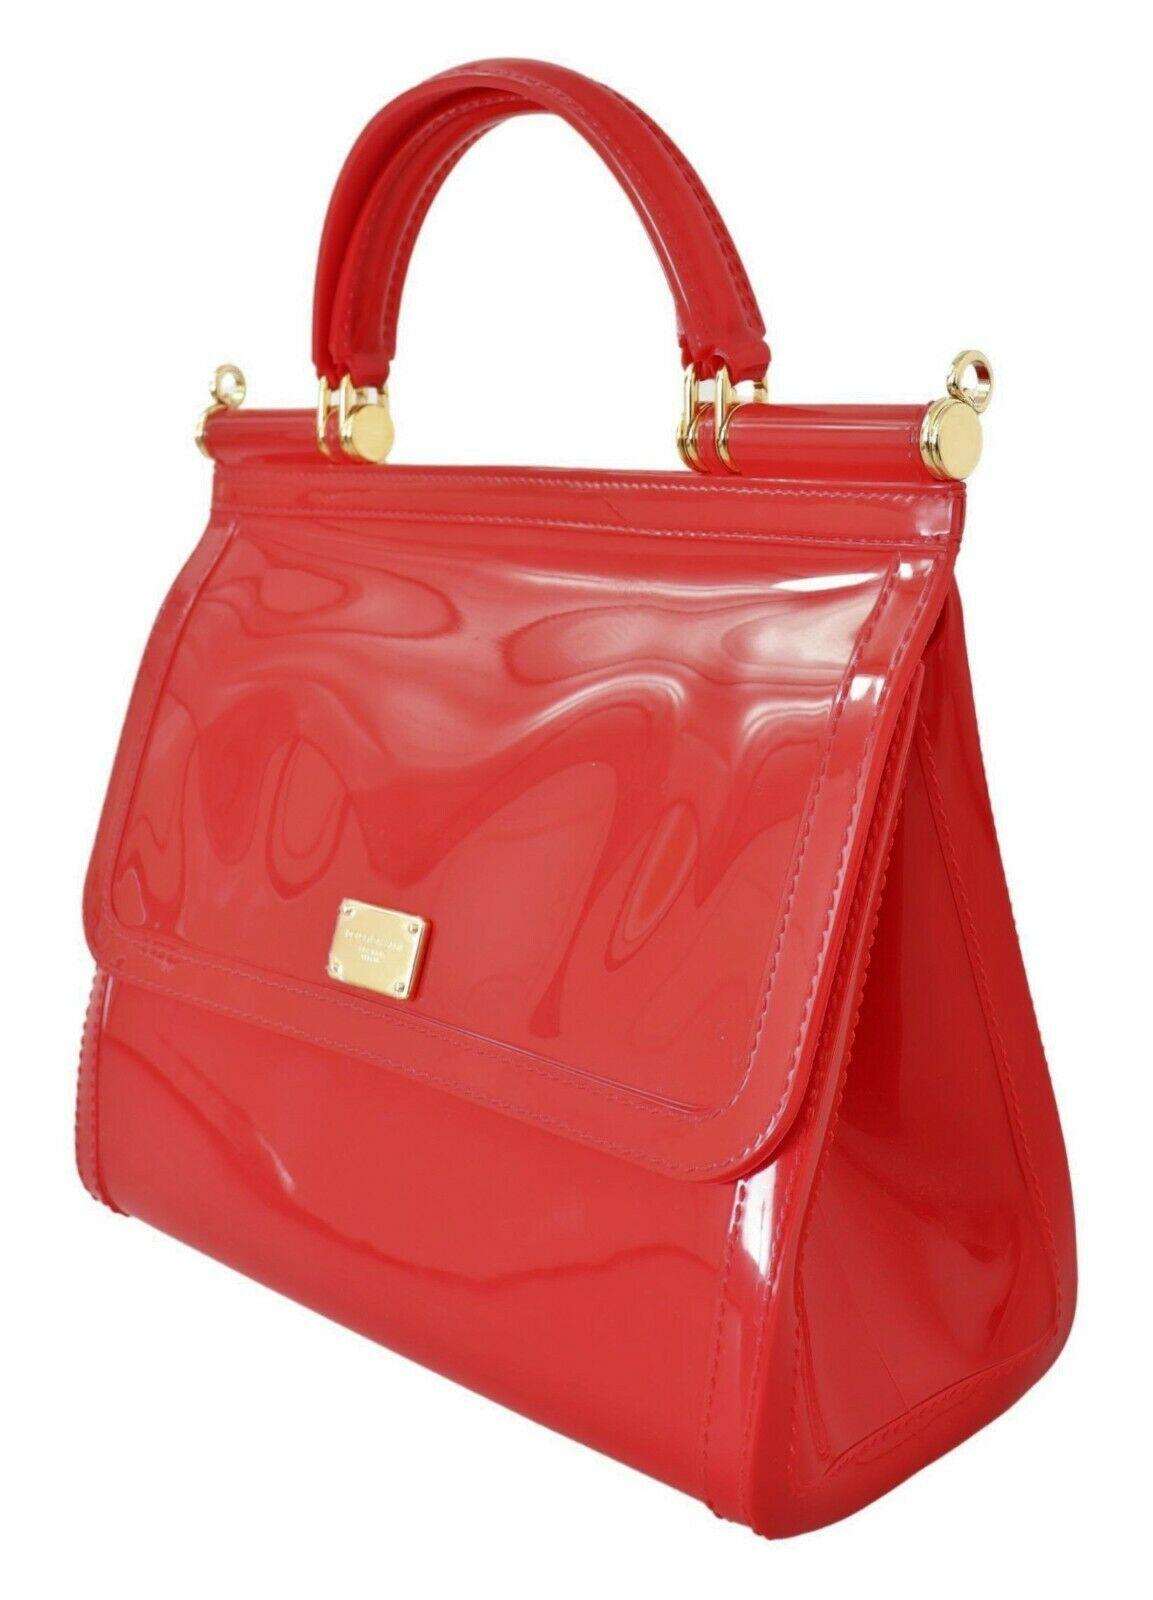 Absolutely stunning, 100% Authentic, brand new with tags Dolce & Gabbana bag purse.

Model: Sicily Bag

Color: Red with gold detailing

Material: 100% PVC

Double handle, shoulder strap is missing

Magnetic closure

Logo details

Made in Italy

Very